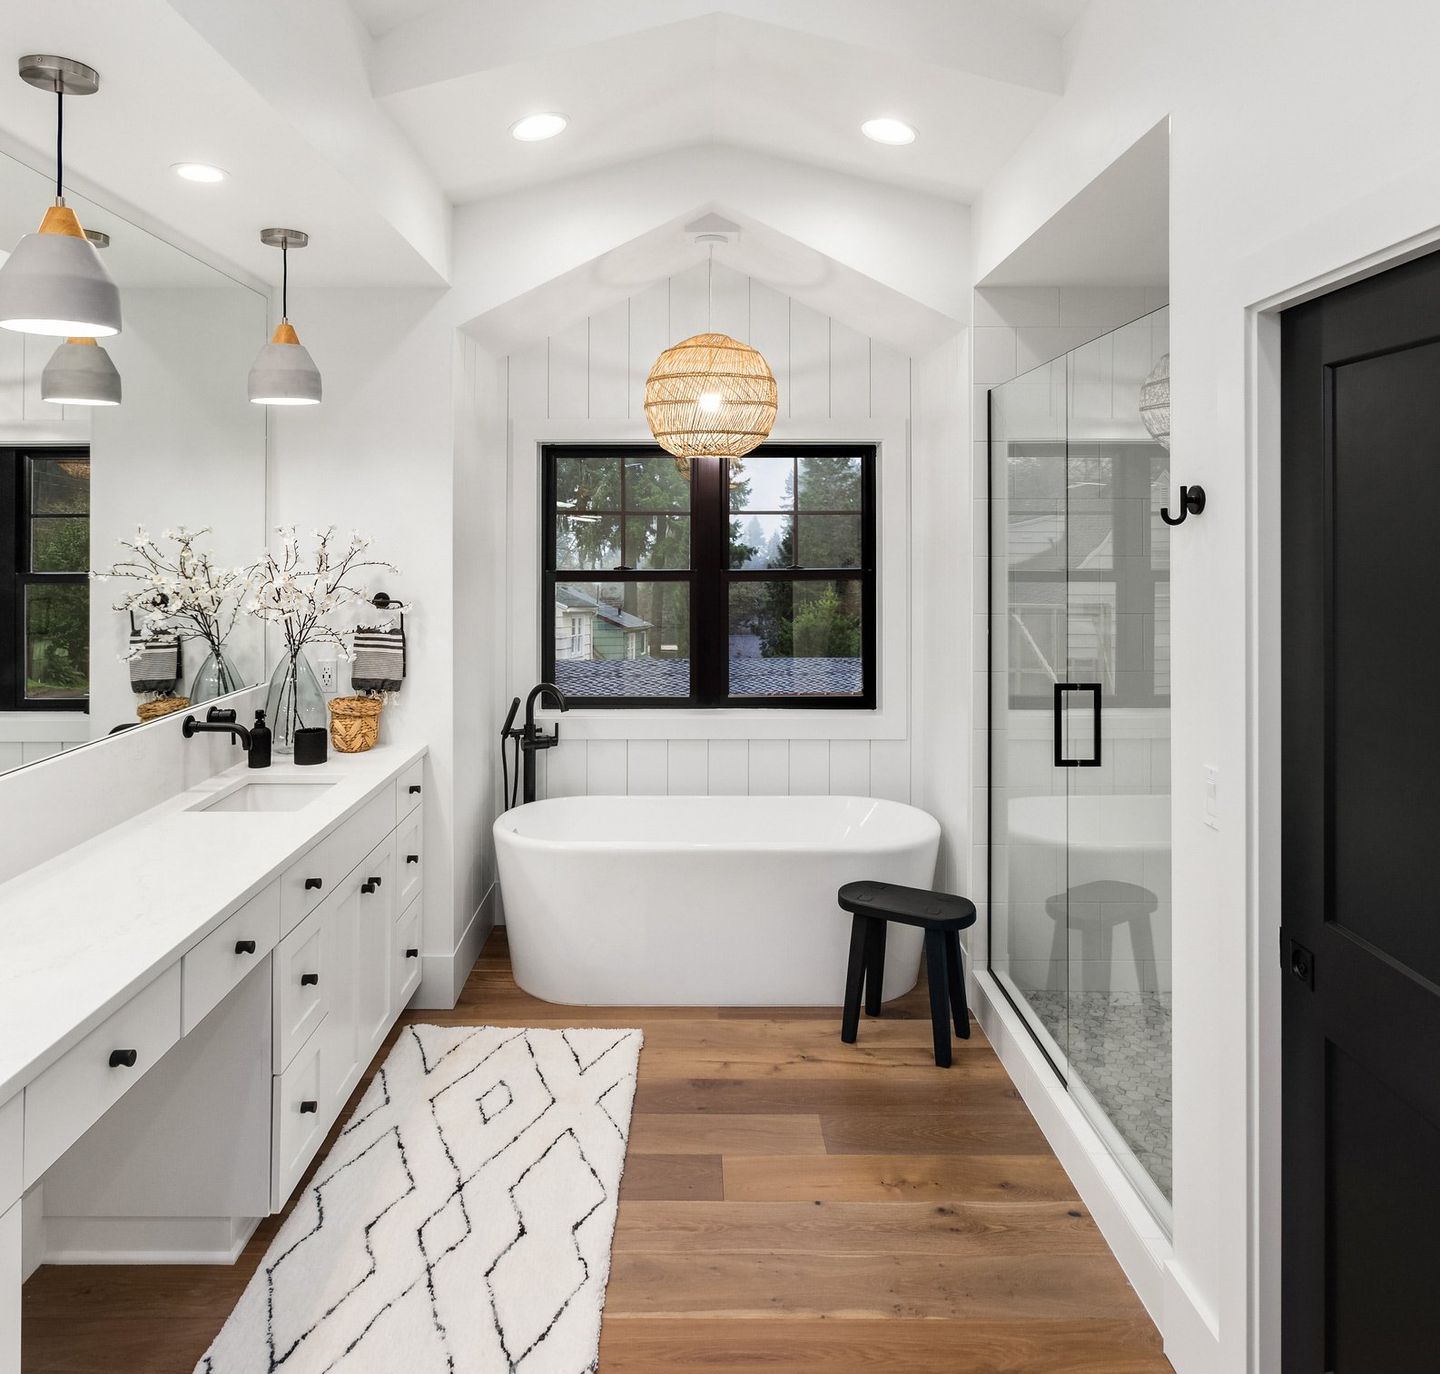 Make the most of your bathroom renovation